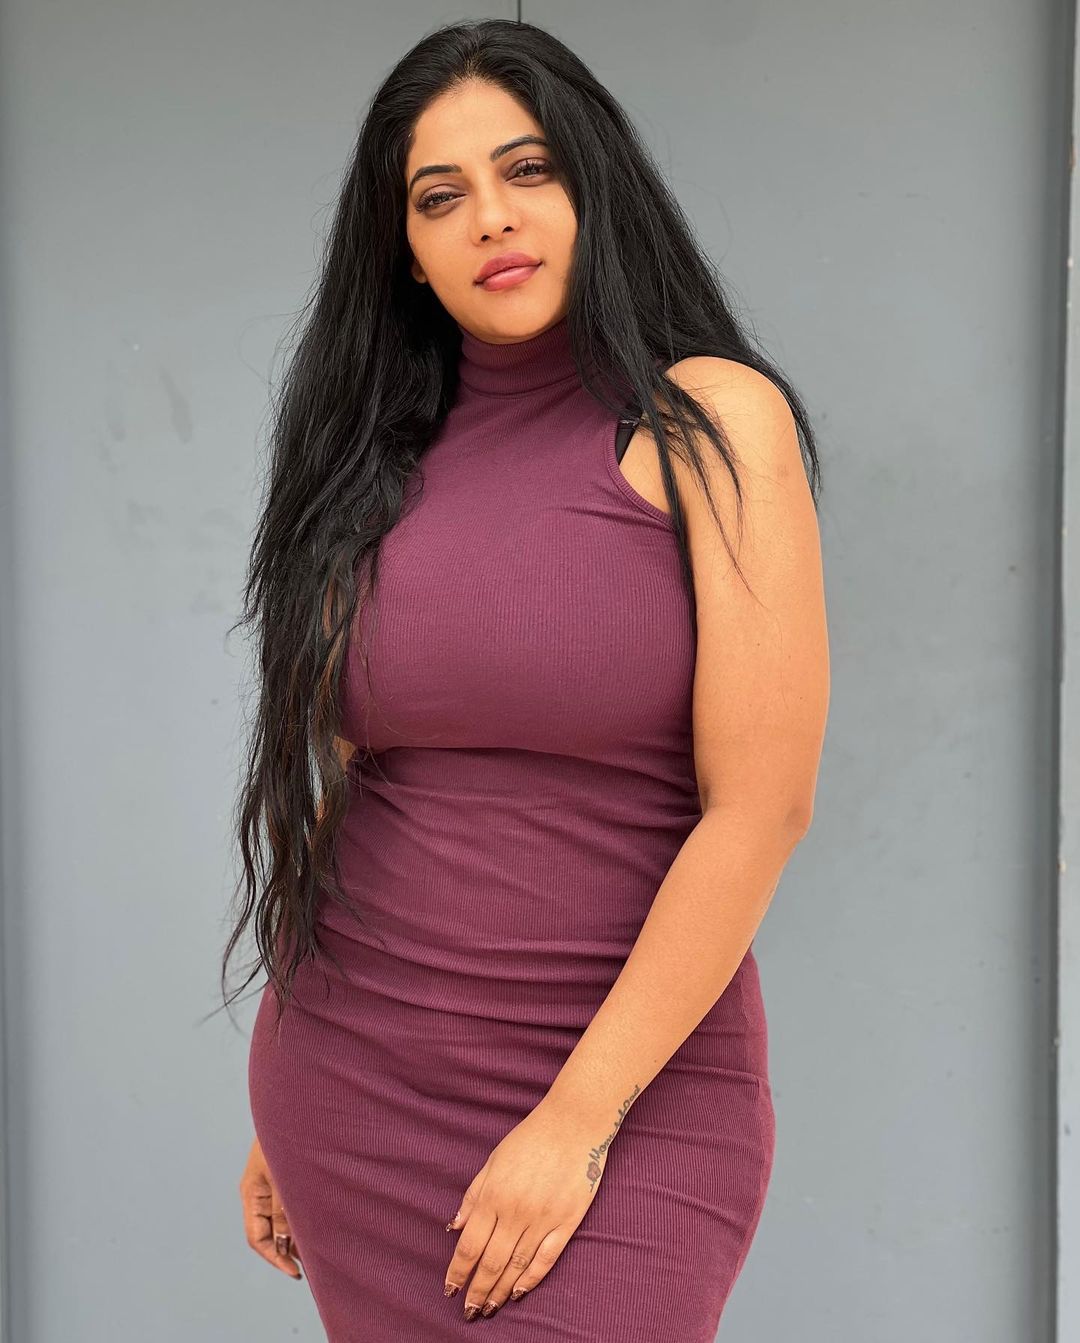 Actress reshma pasupuleti looks stunning and romantic in this photos-Actressreshma Photos,Spicy Hot Pics,Images,High Resolution WallPapers Download